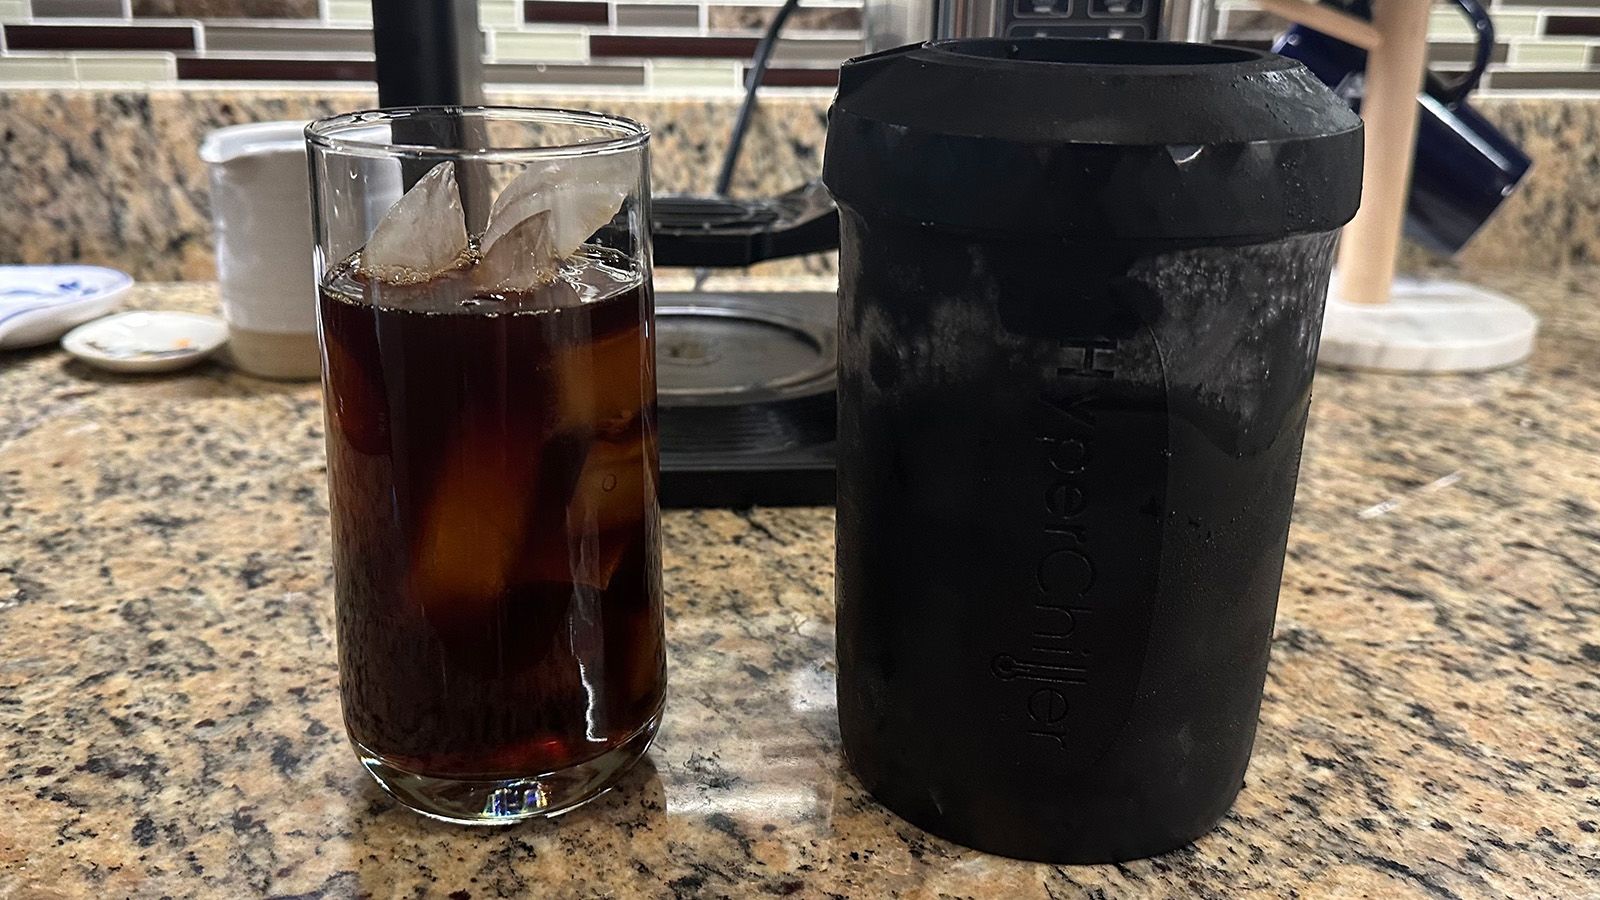 HyperChiller V2 Review: The Best Iced Coffee Maker? - Coffee Brew Guides